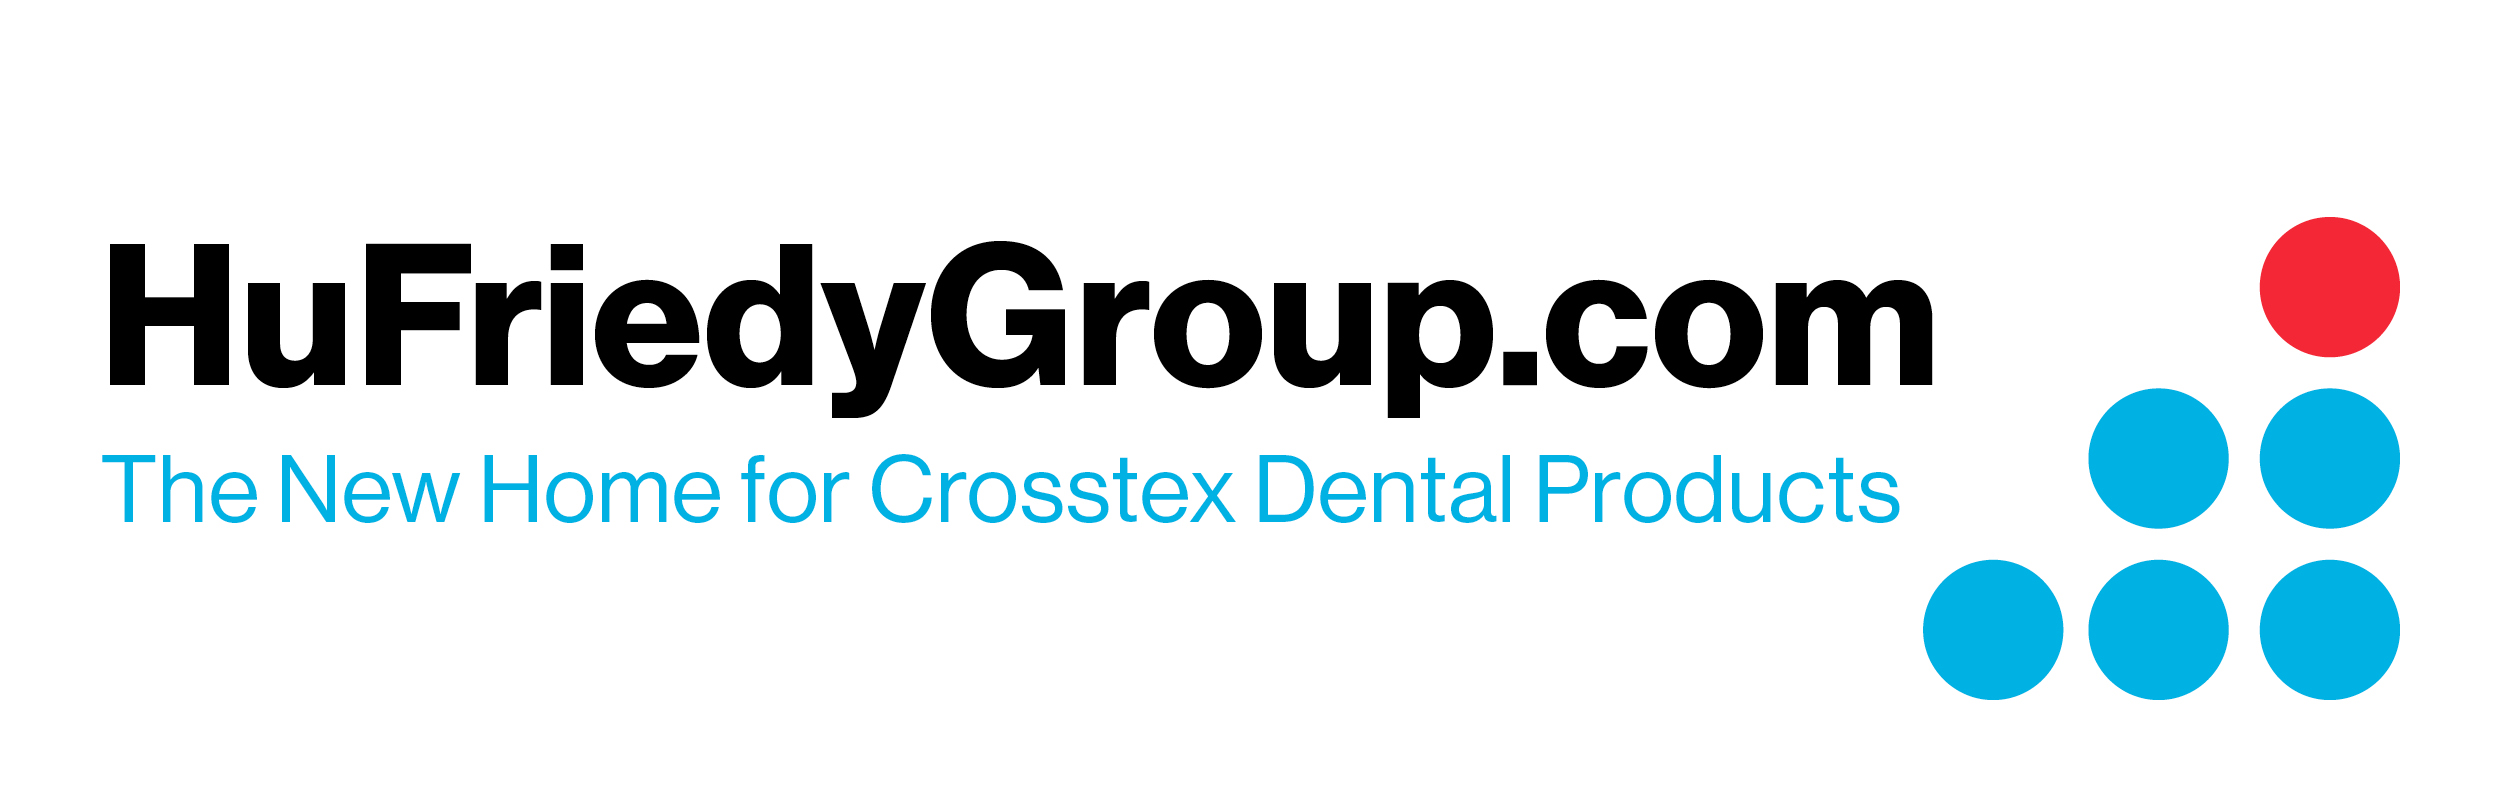 HuFriedyGroup - The new home for Crosstex Dental Products